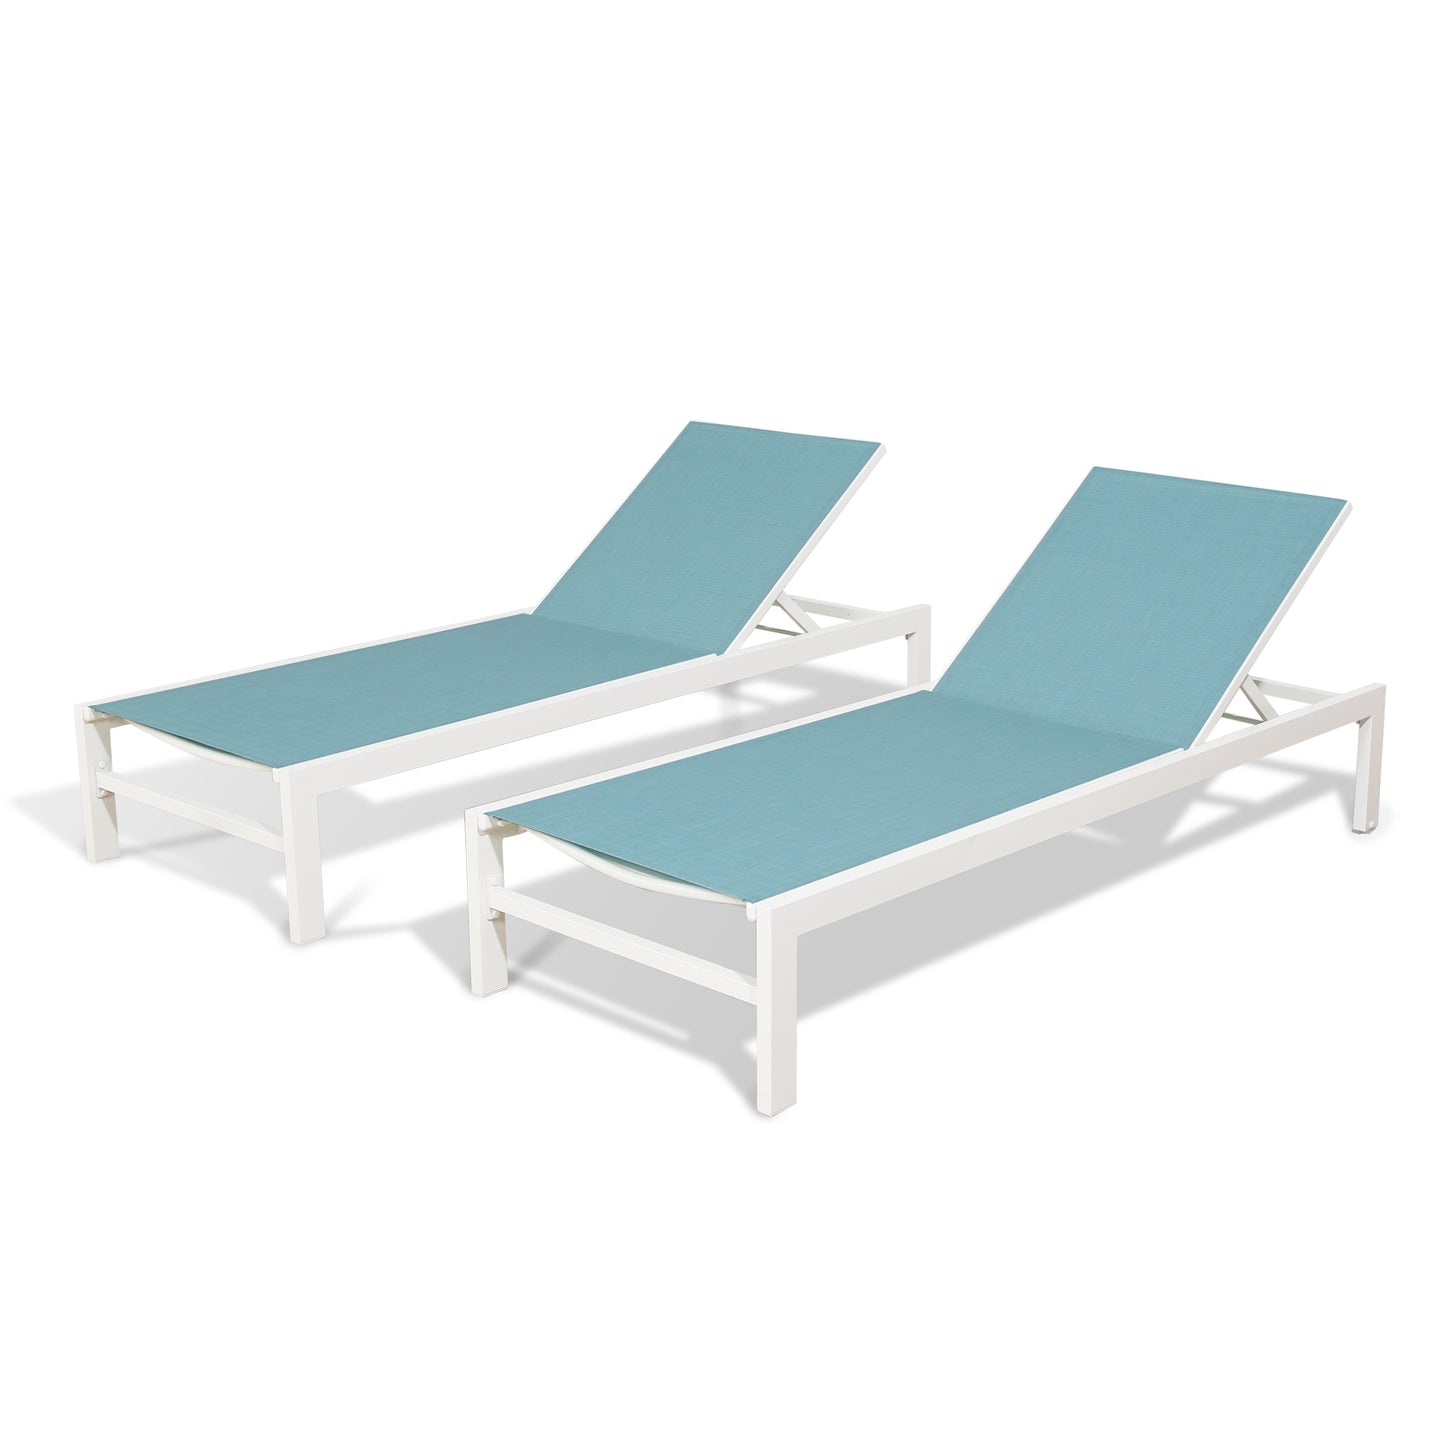 2 Pieces Outdoor Aluminum Chaise Lounge Chairs Patio Sling Sun Lounger Set Recliner with Wheels (Turquoise)